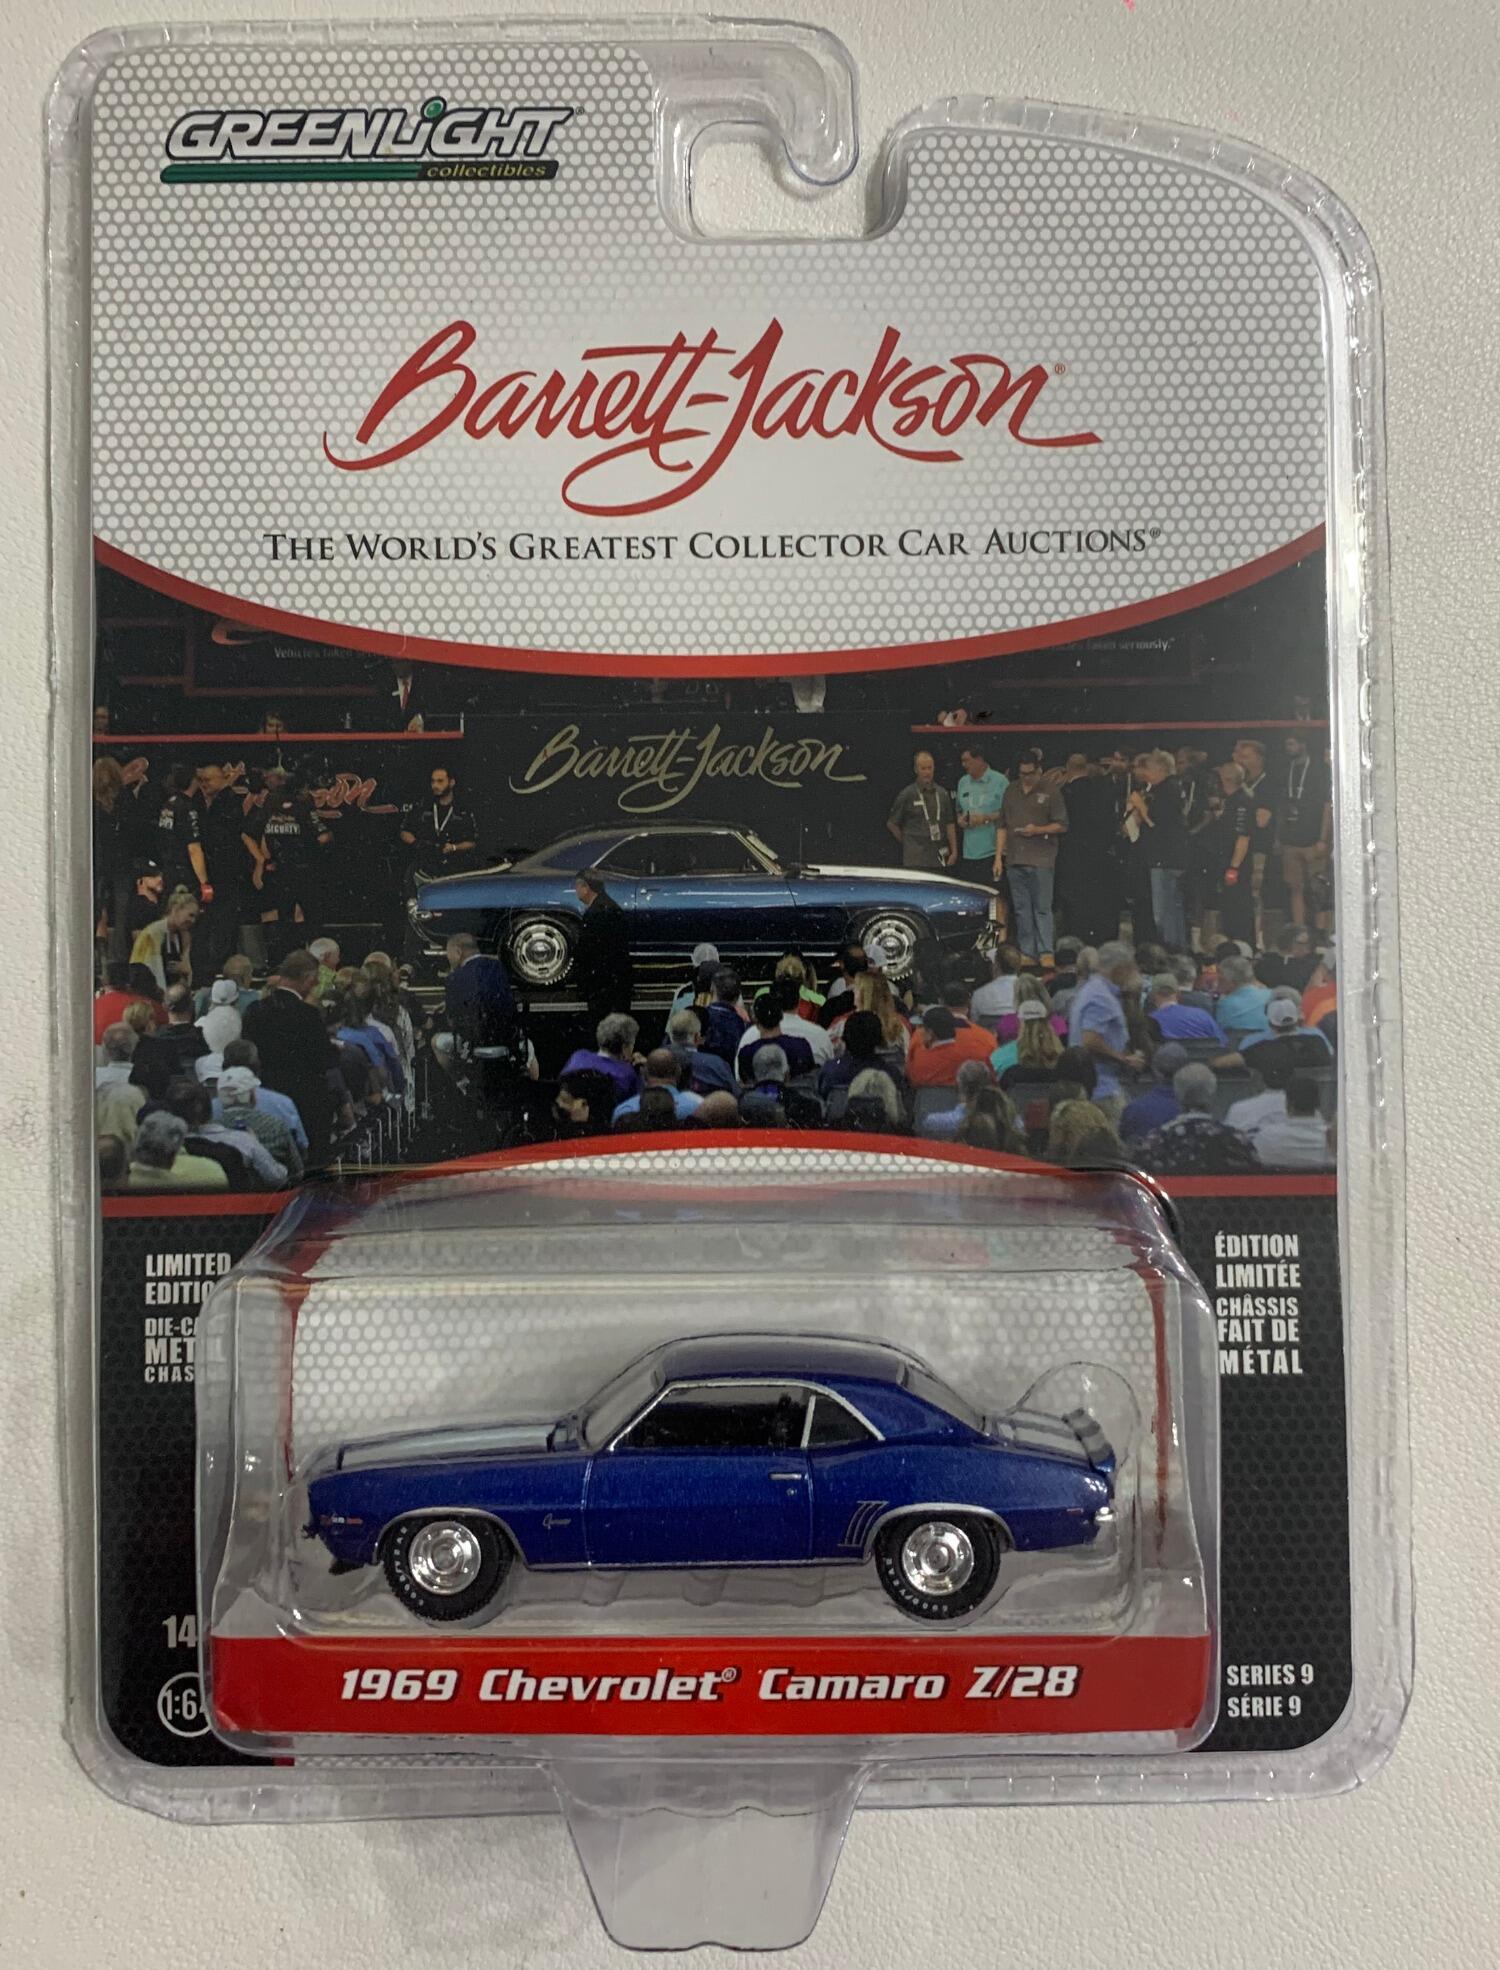 scale 1:64 models produced by greenlight of Barrett-Jackson models from the 'worlds greatest collector car auctions'